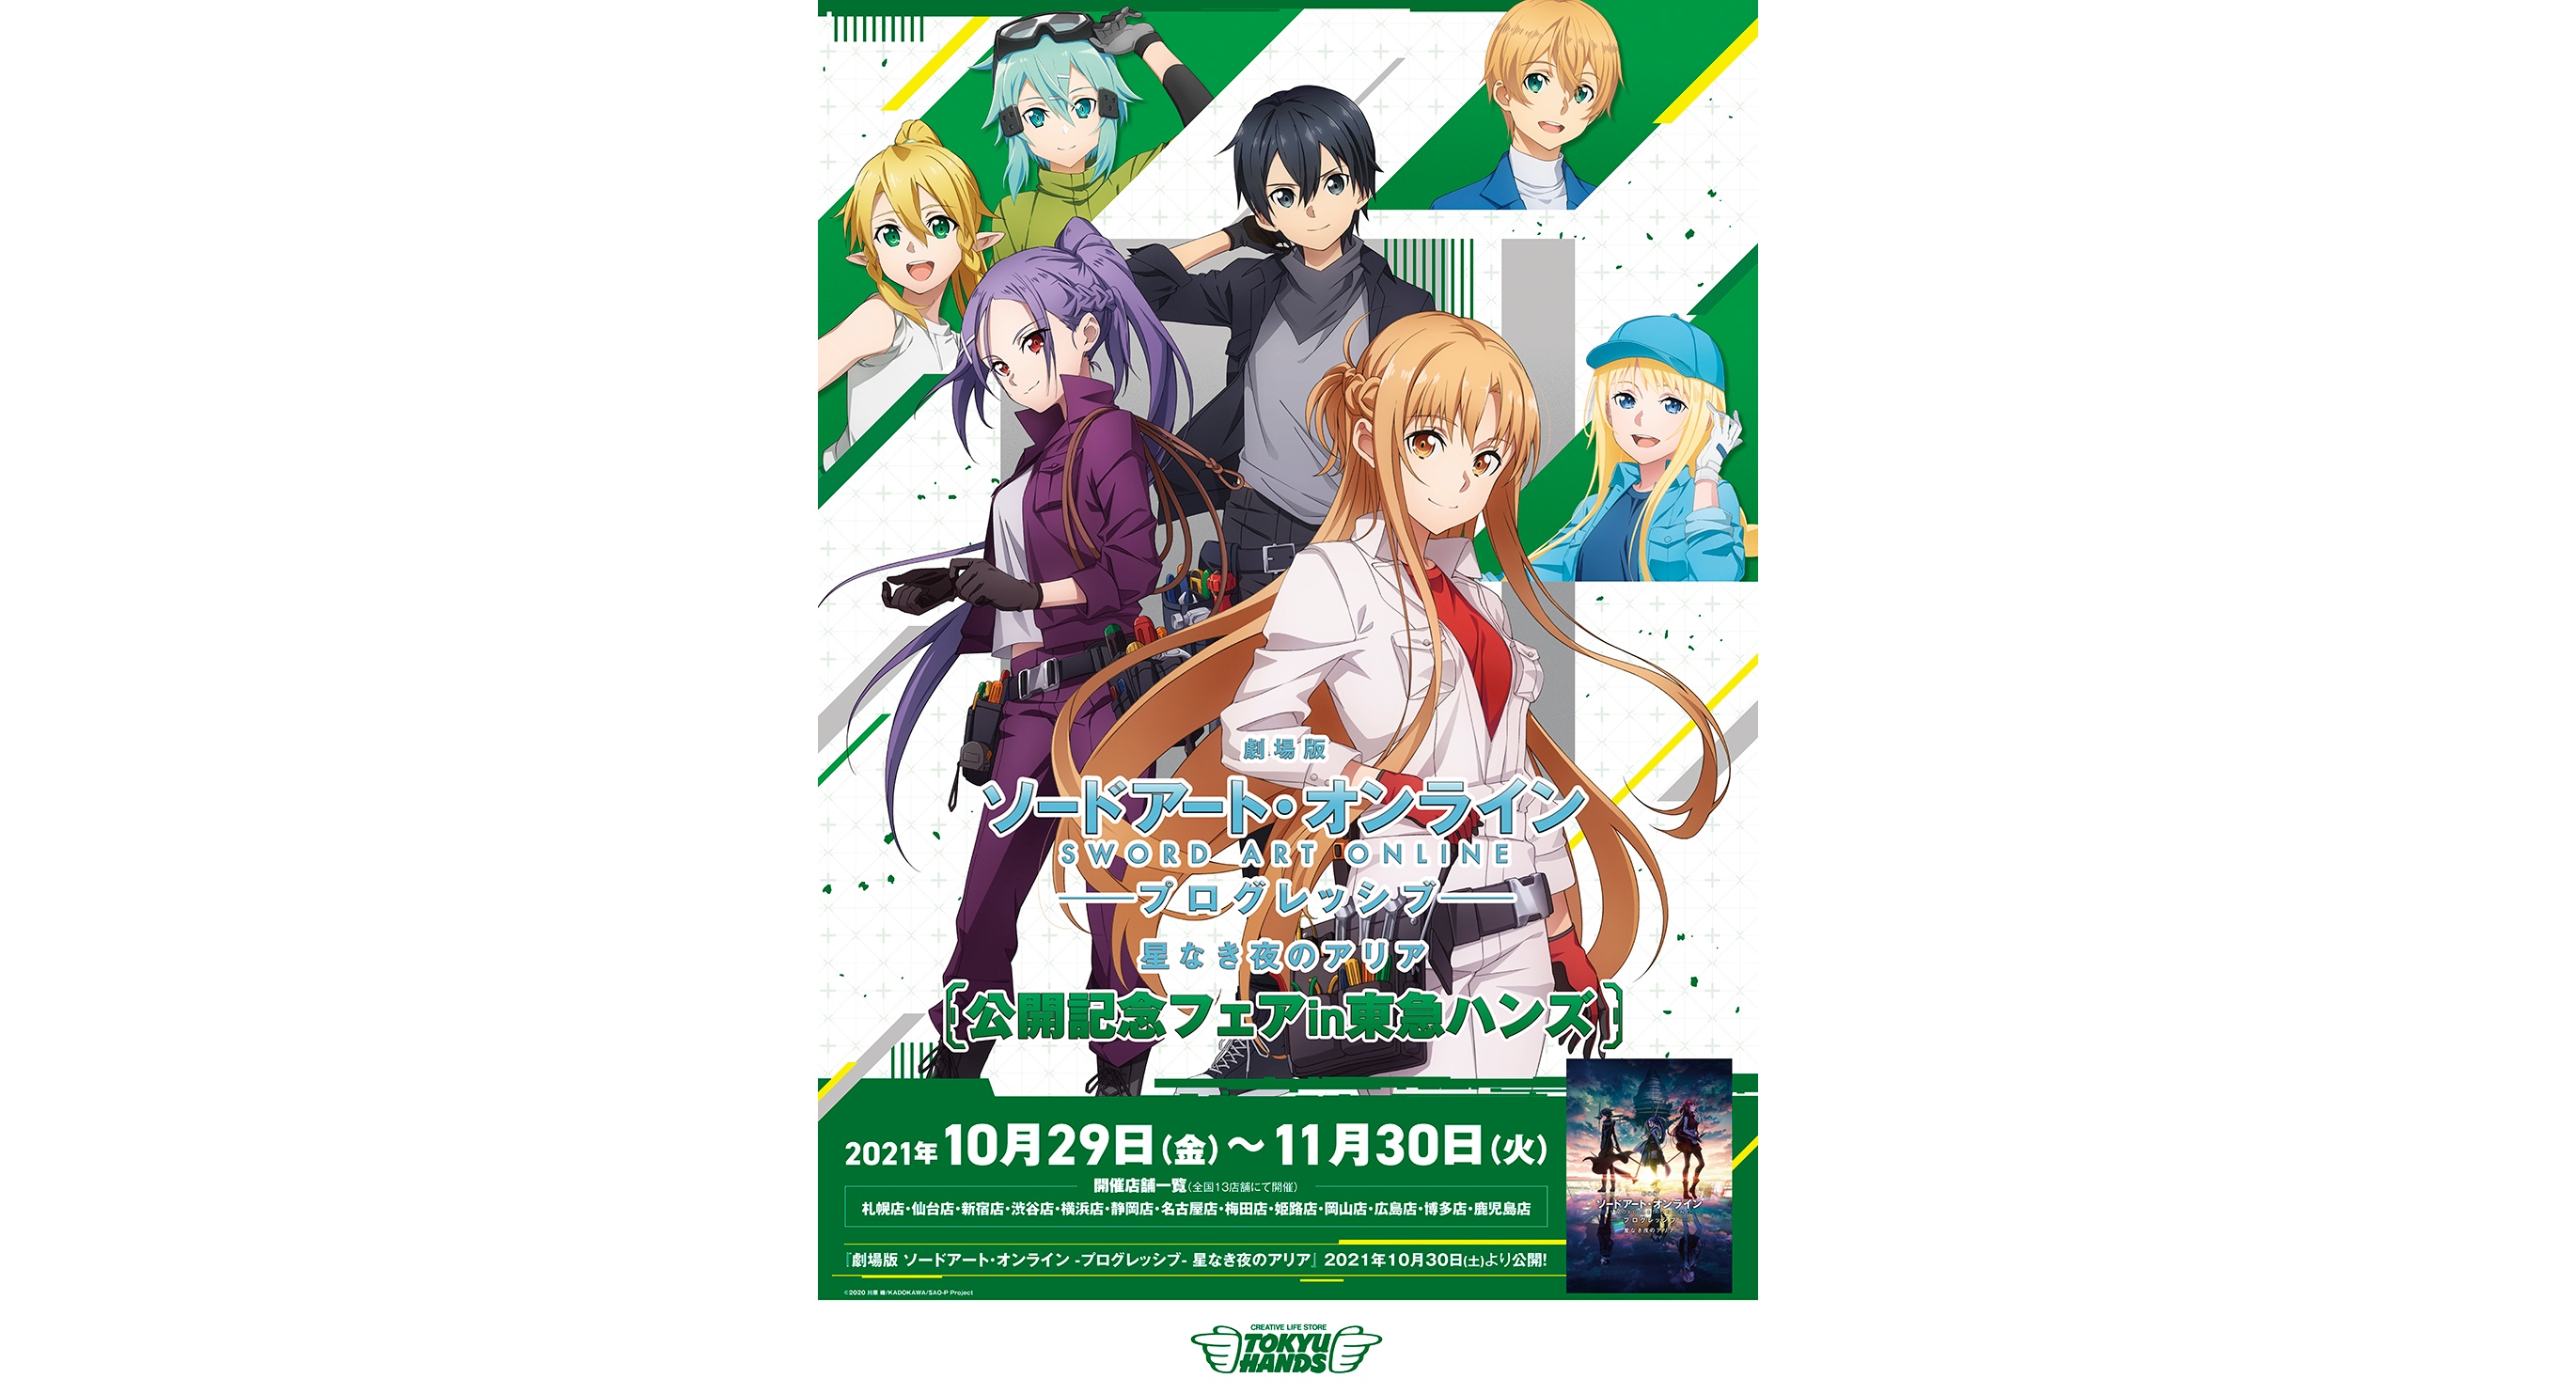 Sword Art Online -Full Dive- (Limited Edition) Blu-ray JAPAN